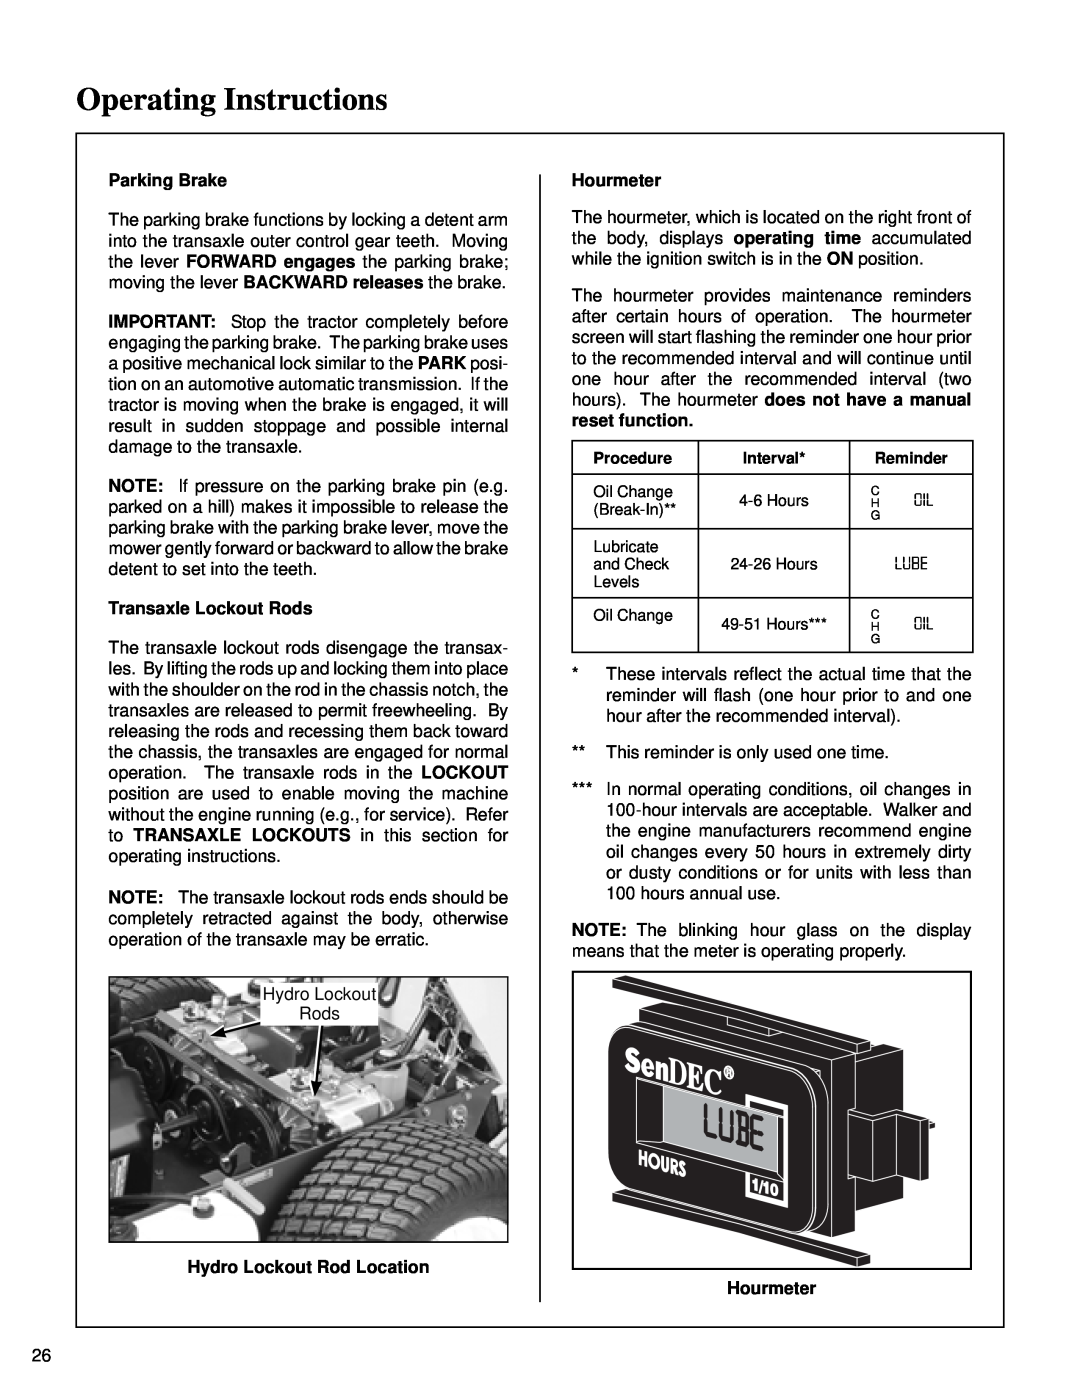 Briggs & Stratton MB (18 HP) Operating Instructions, Parking Brake, Transaxle Lockout Rods, Hydro Lockout Rod Location 